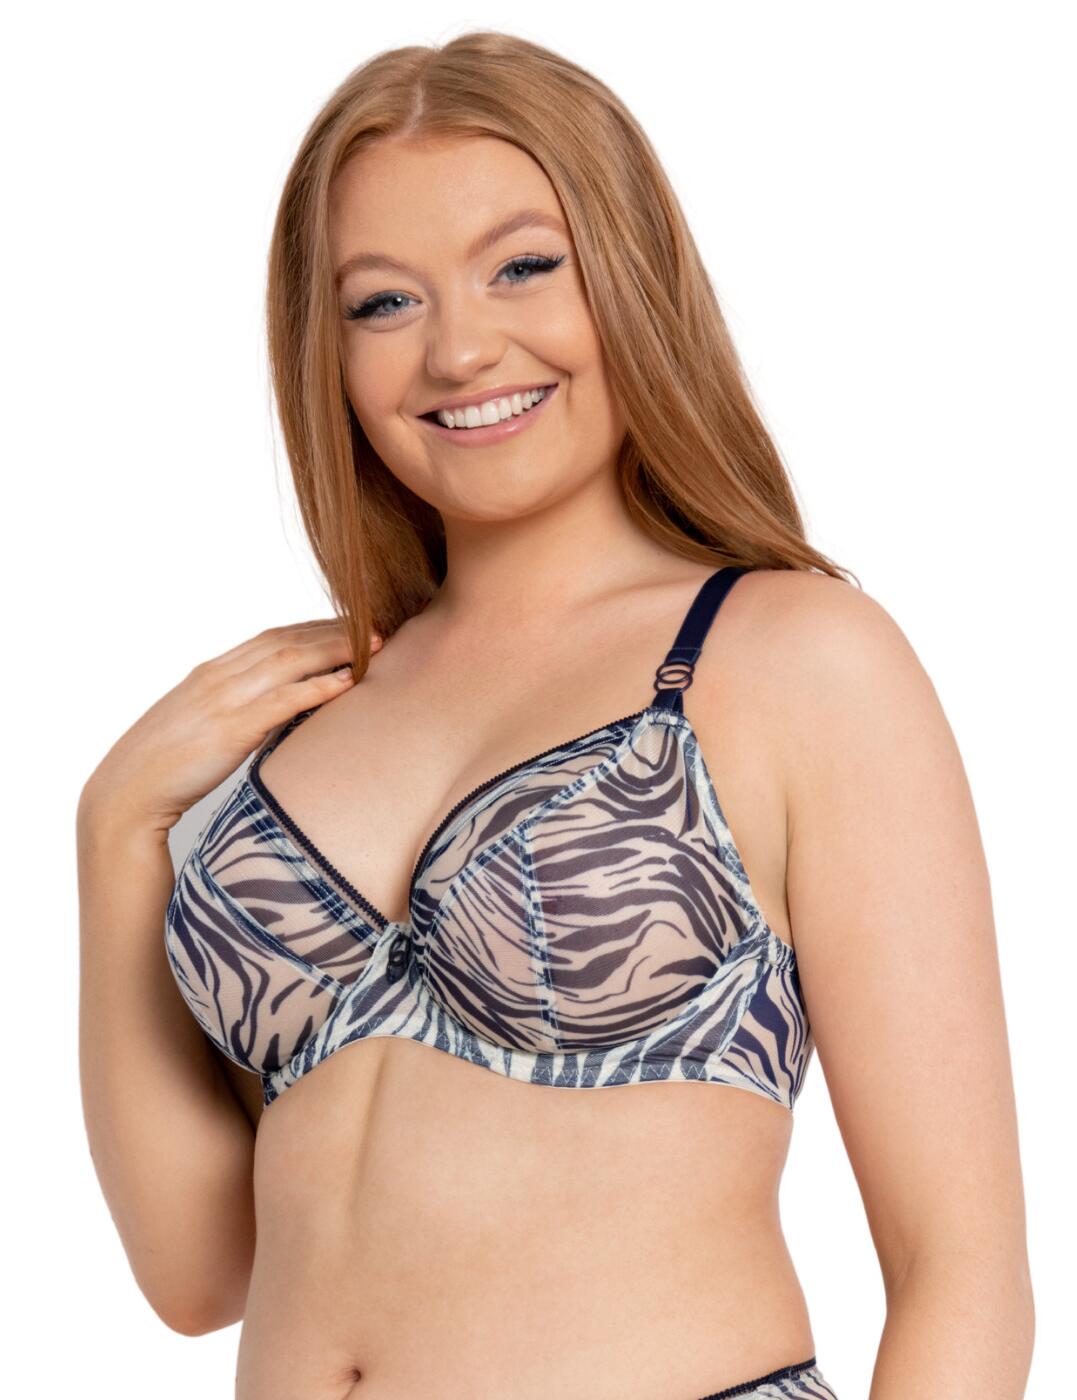 Shop Printed Plunge Bra with Hook and Eye Closure and Adjustable